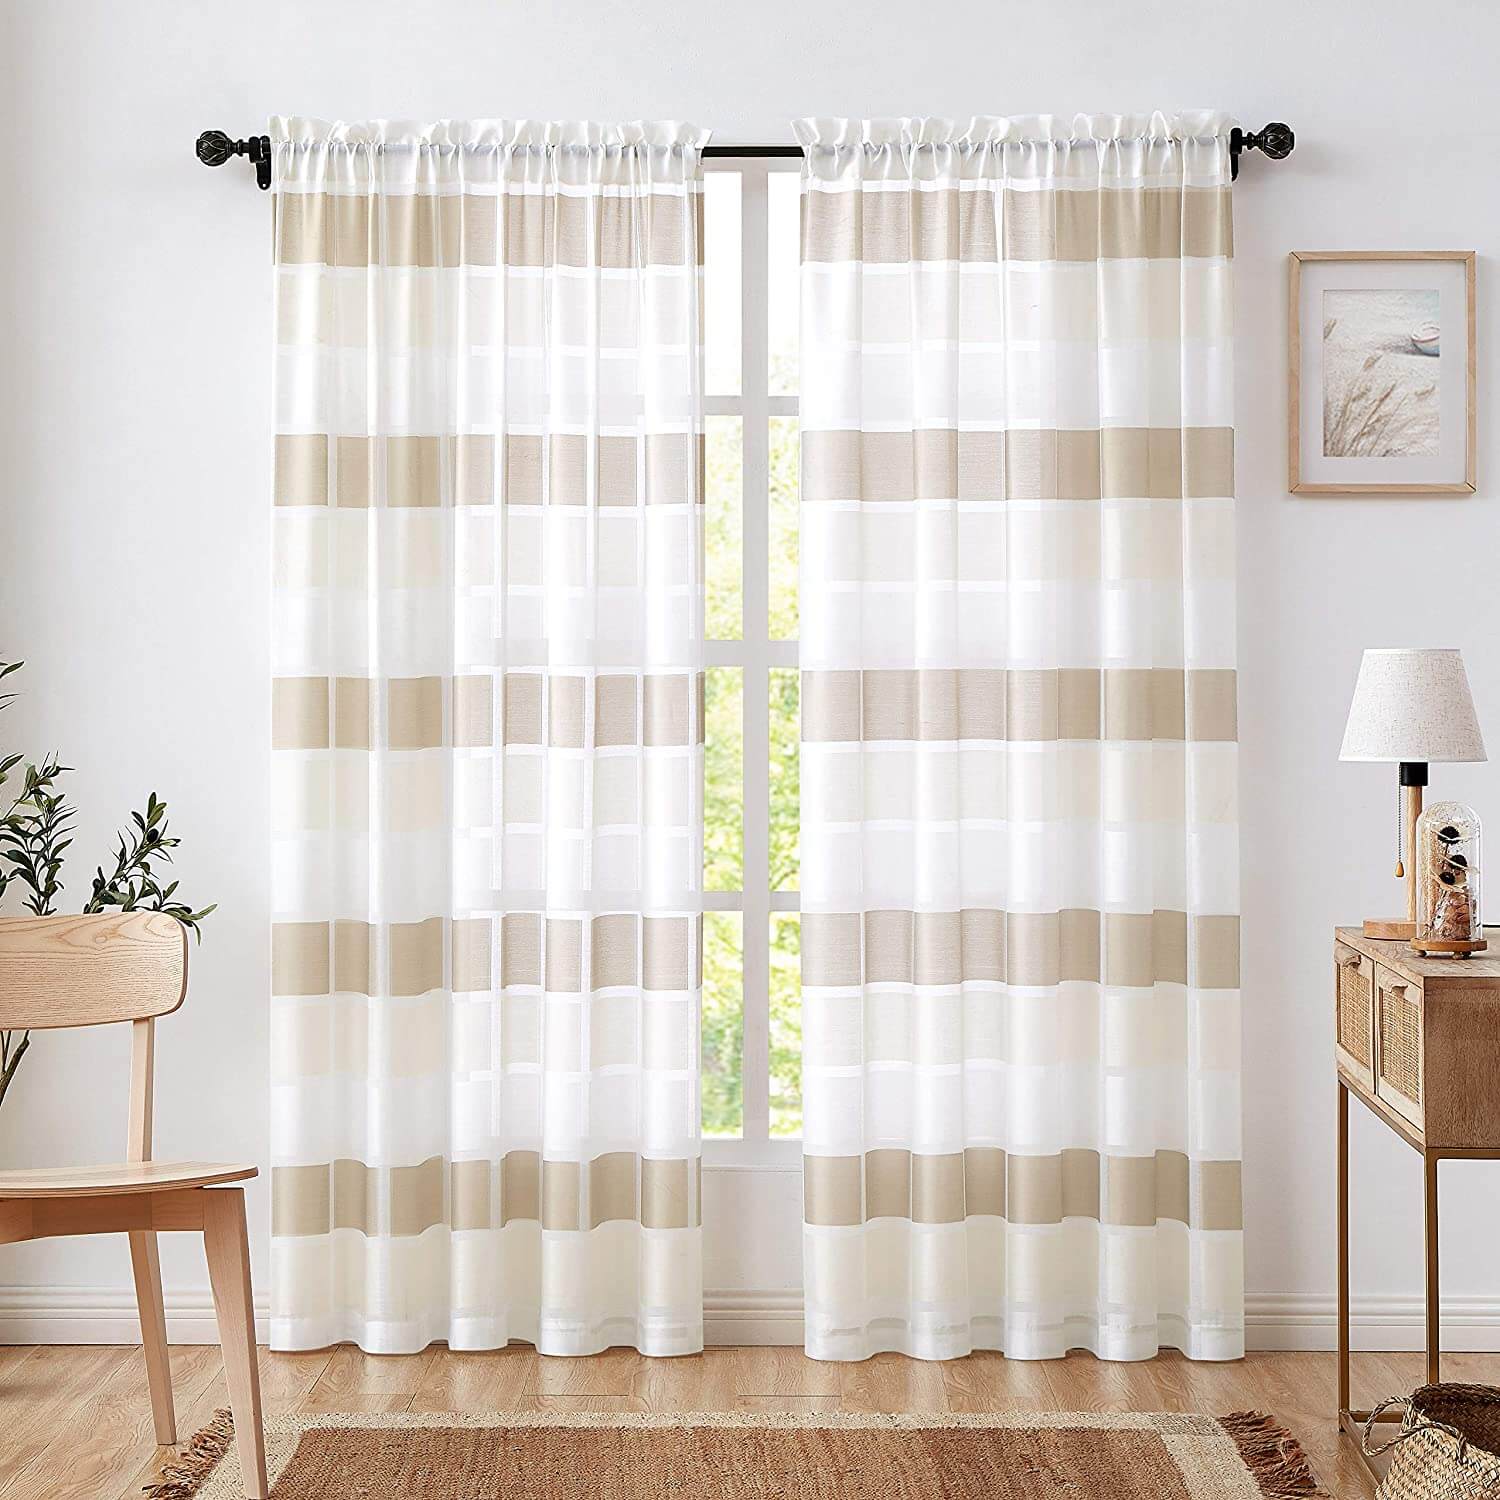 Farmhouse Curtain Ideas | The Best Place to Buy Curtains Online.